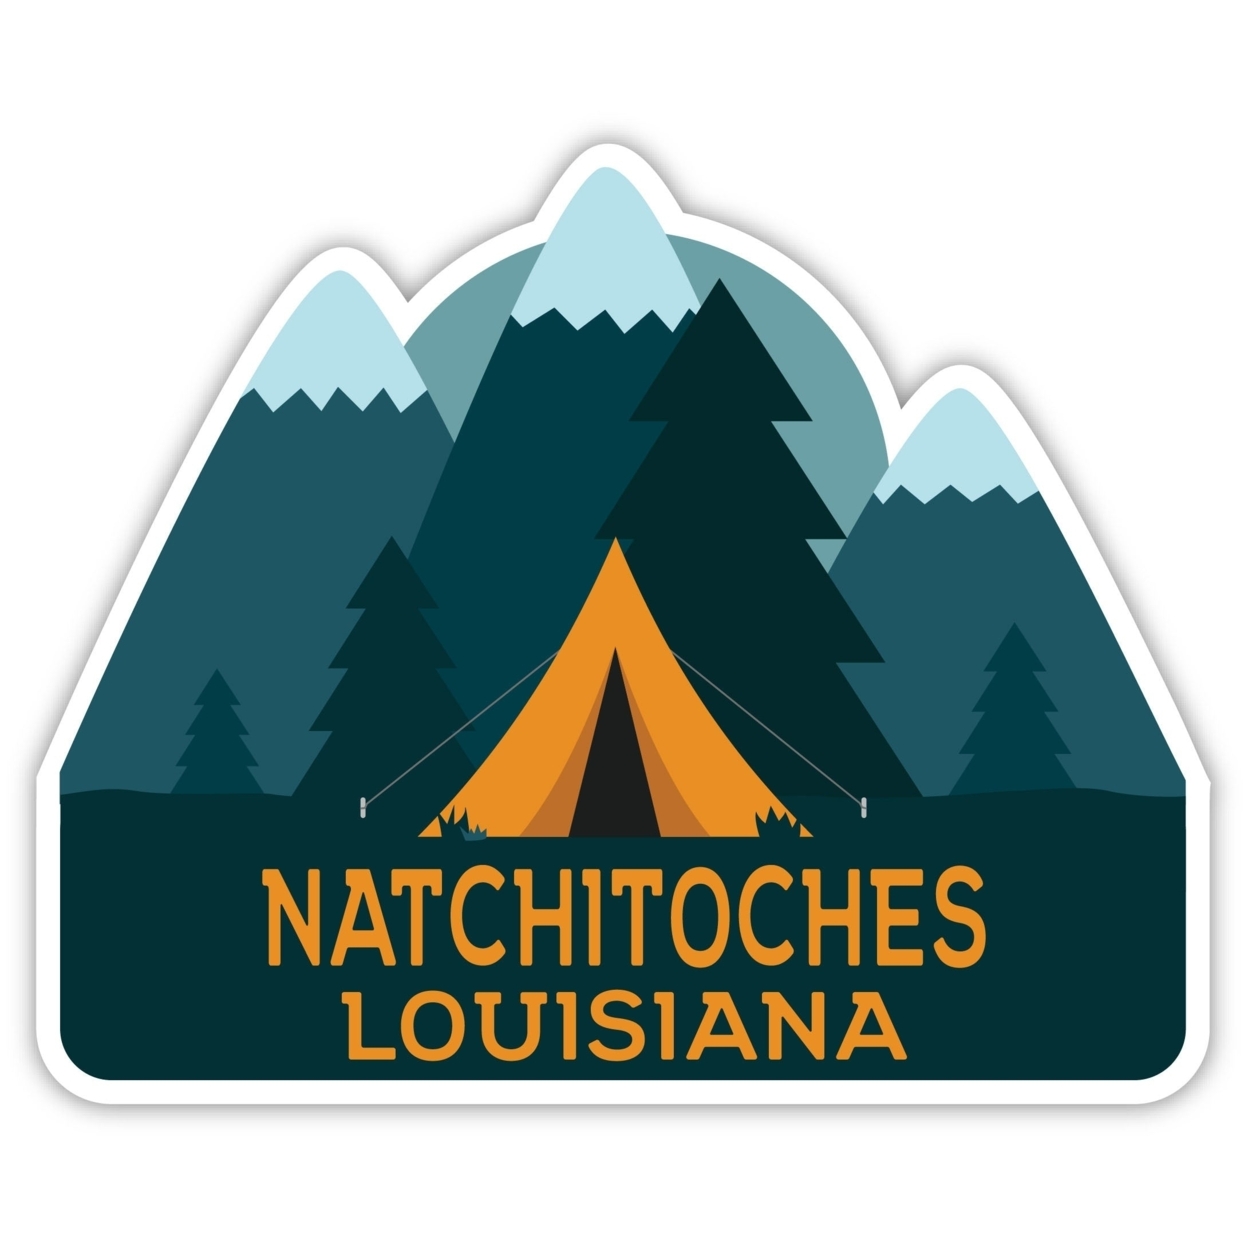 Natchitoches Louisiana Souvenir Decorative Stickers (Choose Theme And Size) - Single Unit, 2-Inch, Tent